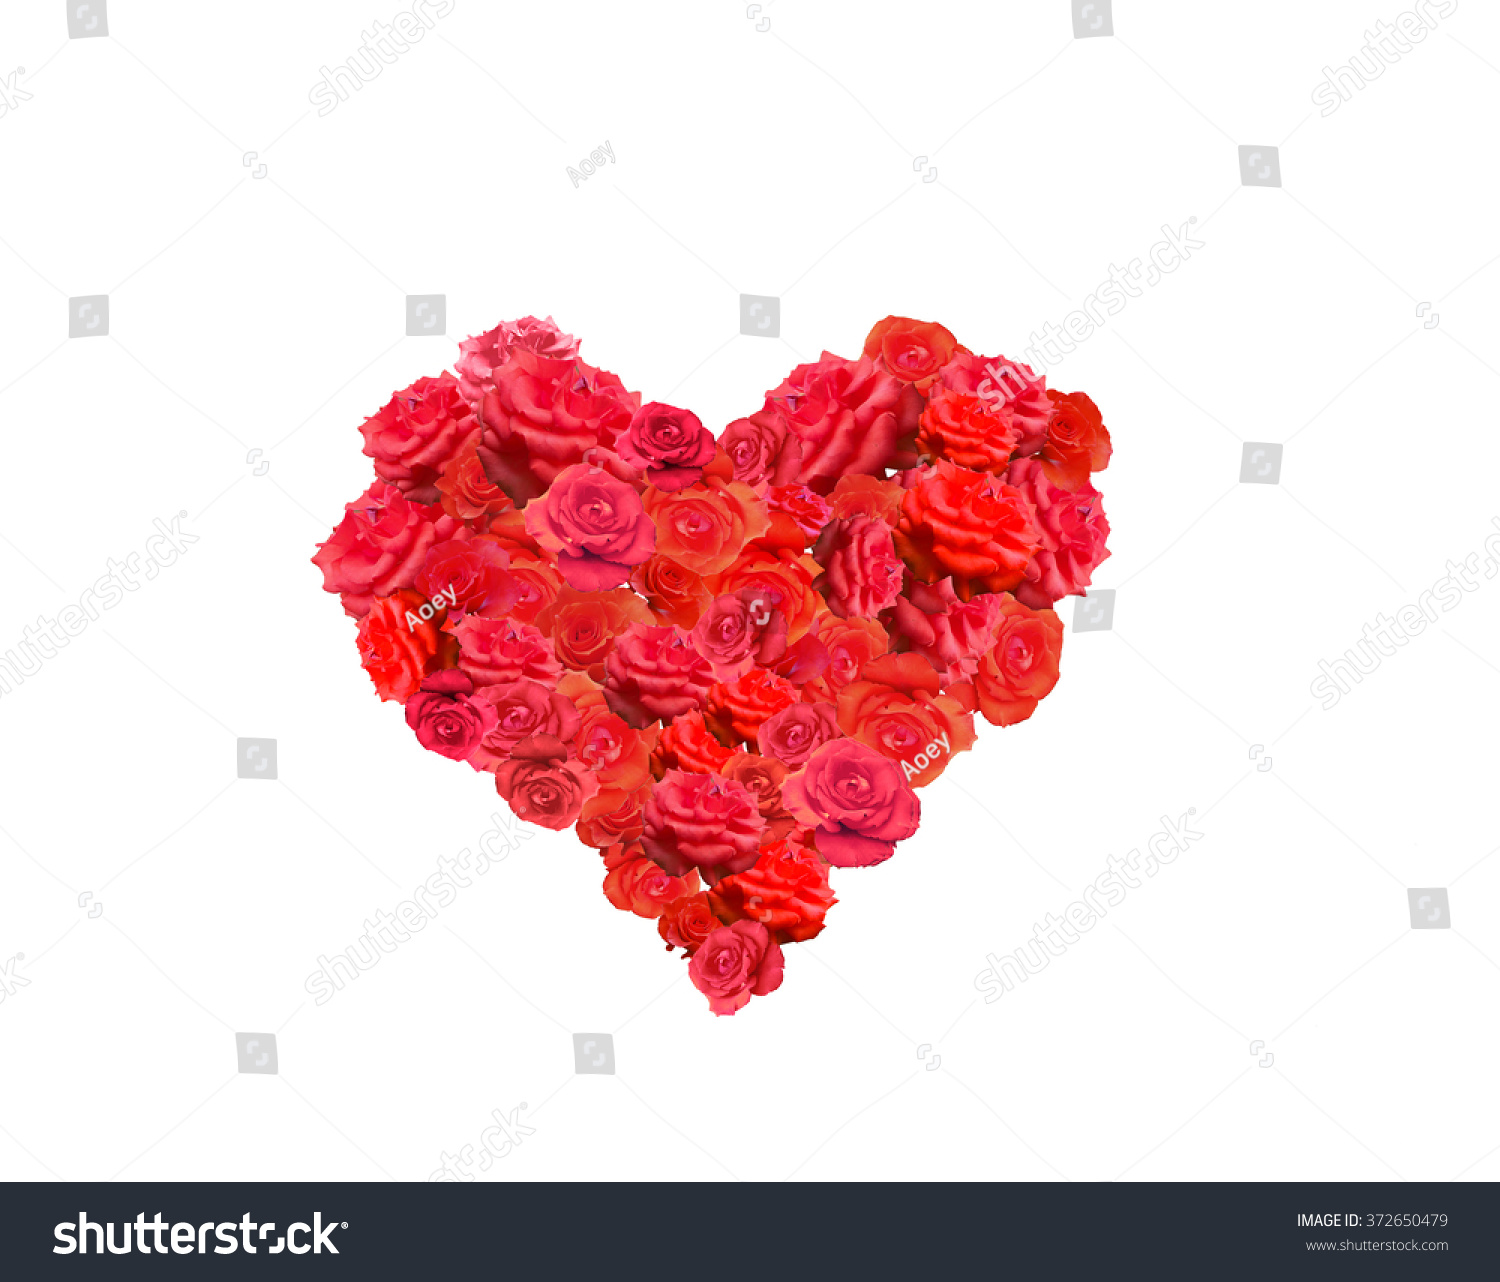 Red Roses Shaped In The Form Of Heart. Many White Roses As A Floral ...